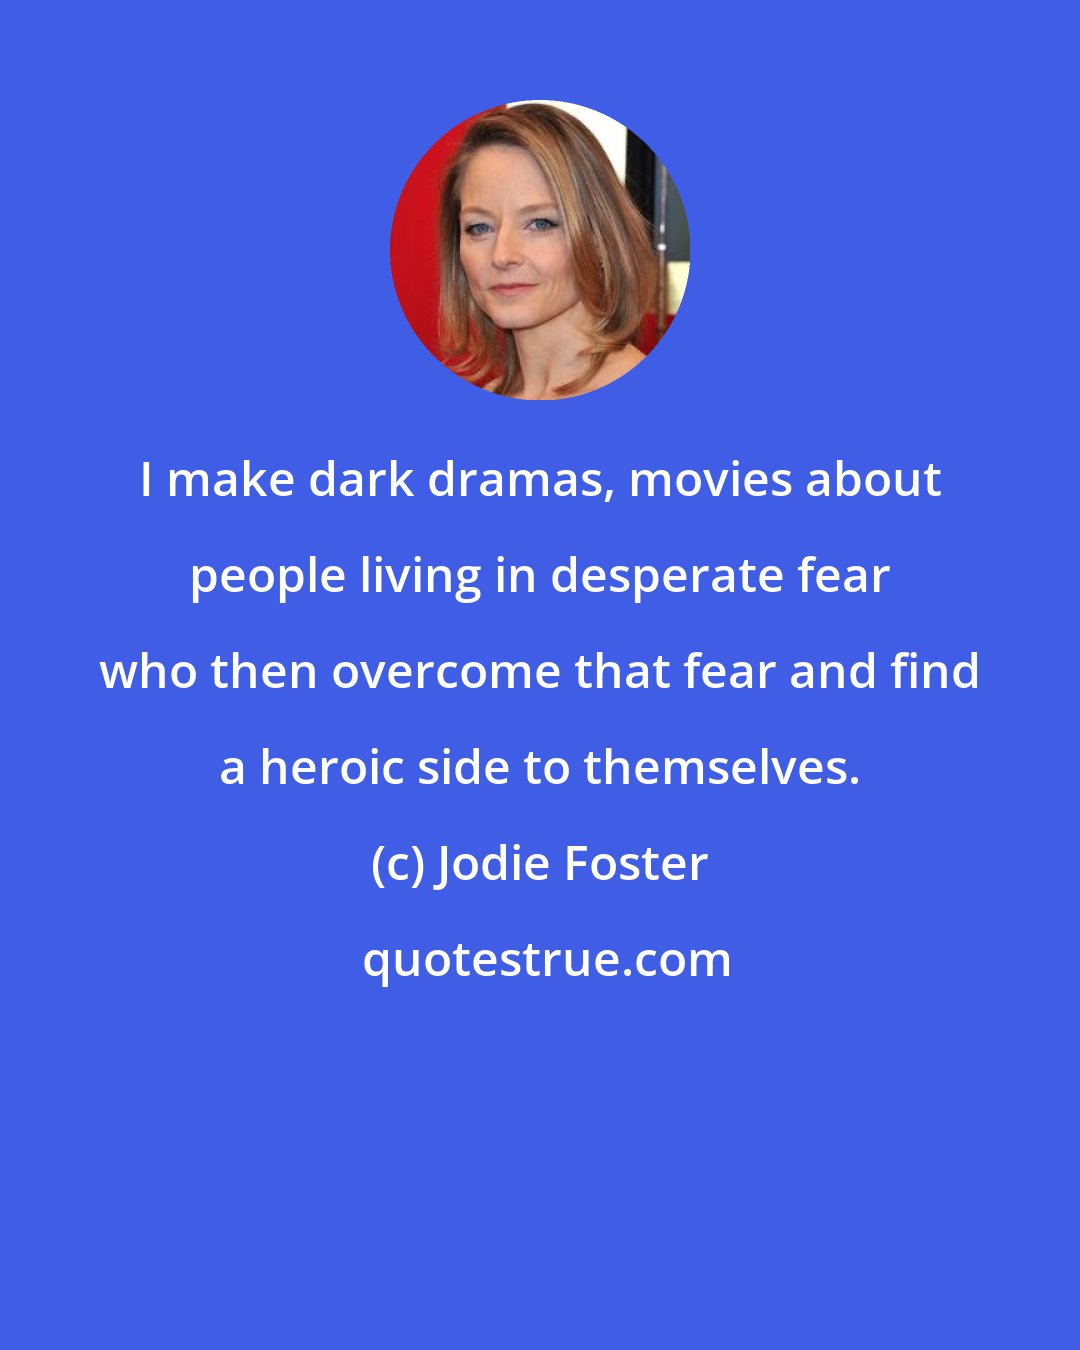 Jodie Foster: I make dark dramas, movies about people living in desperate fear who then overcome that fear and find a heroic side to themselves.